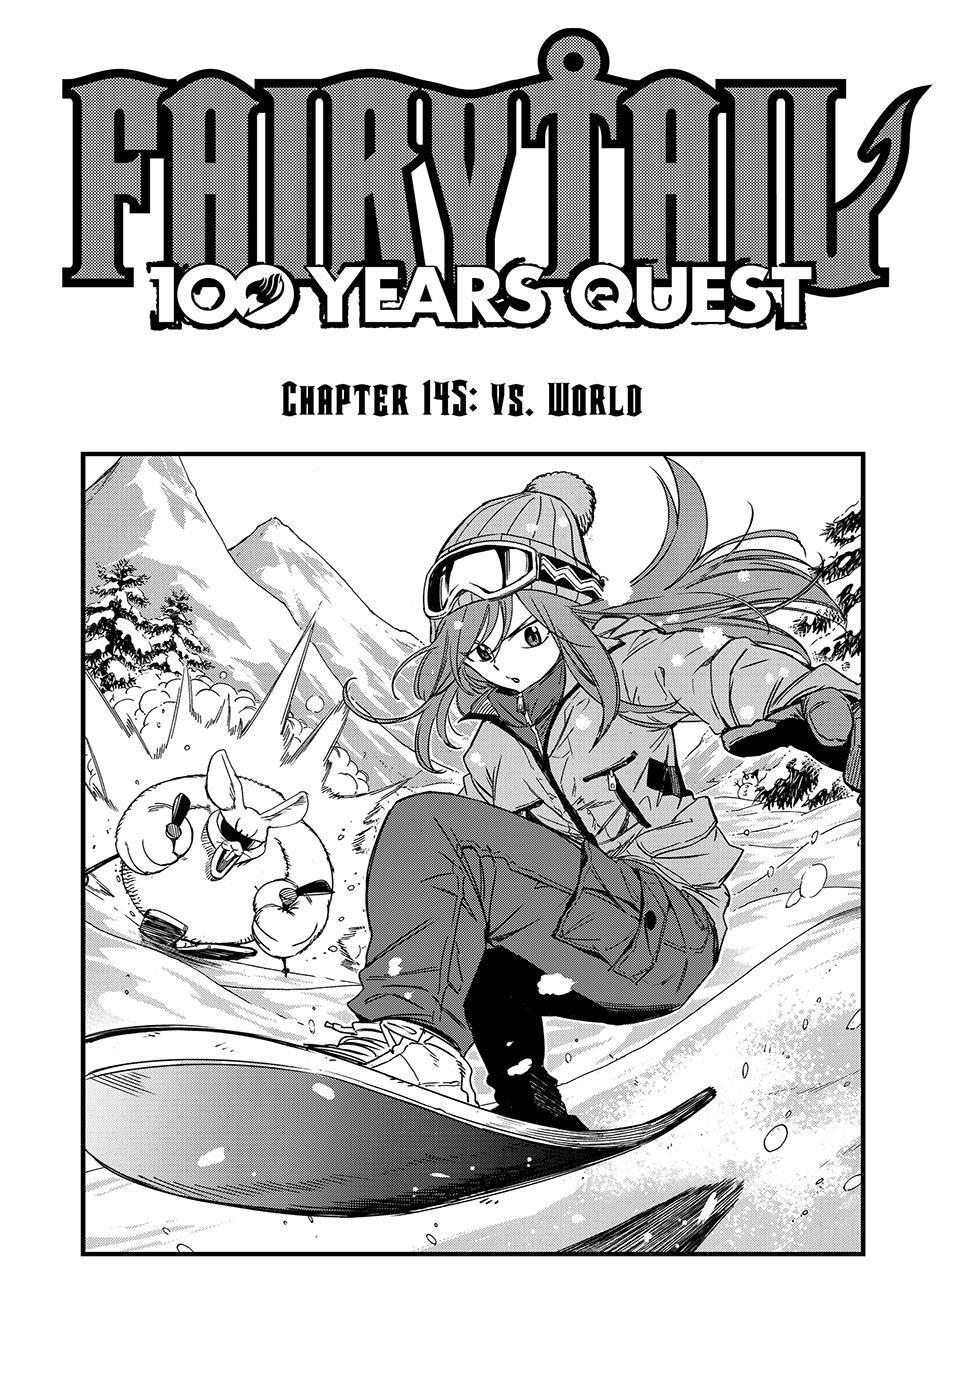 Fairy Tail: 100 Years Quest - Page 1